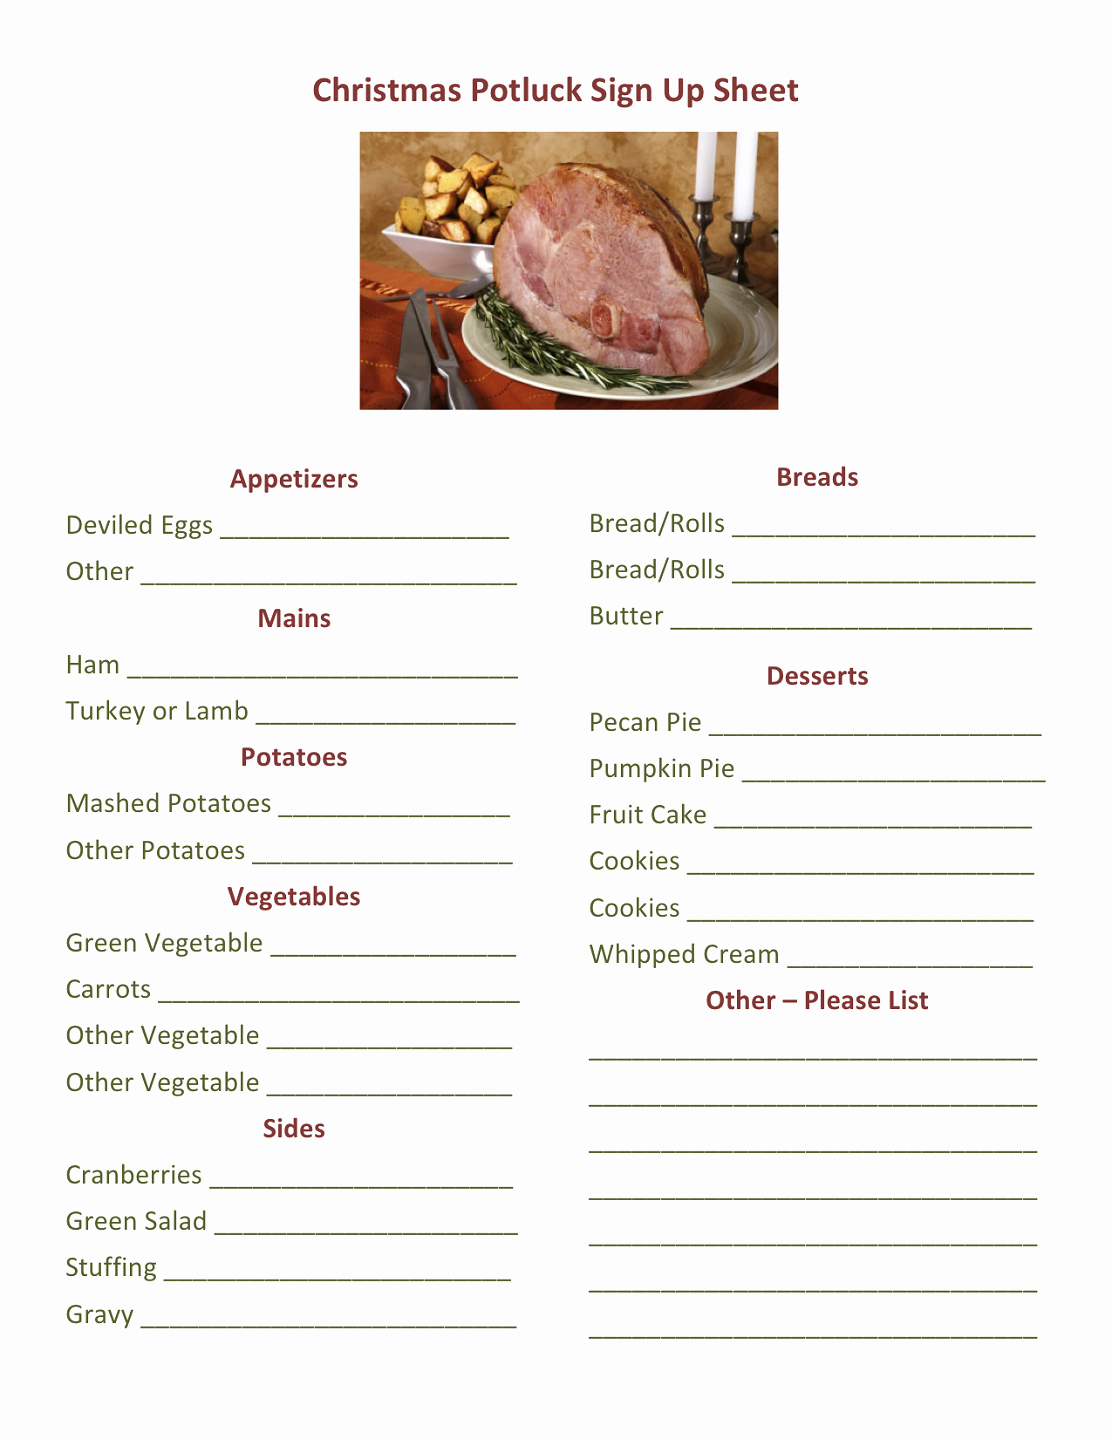 Christmas Sign Up Sheet Templates Awesome Potluck Dinner Sign Up Sheet Printable